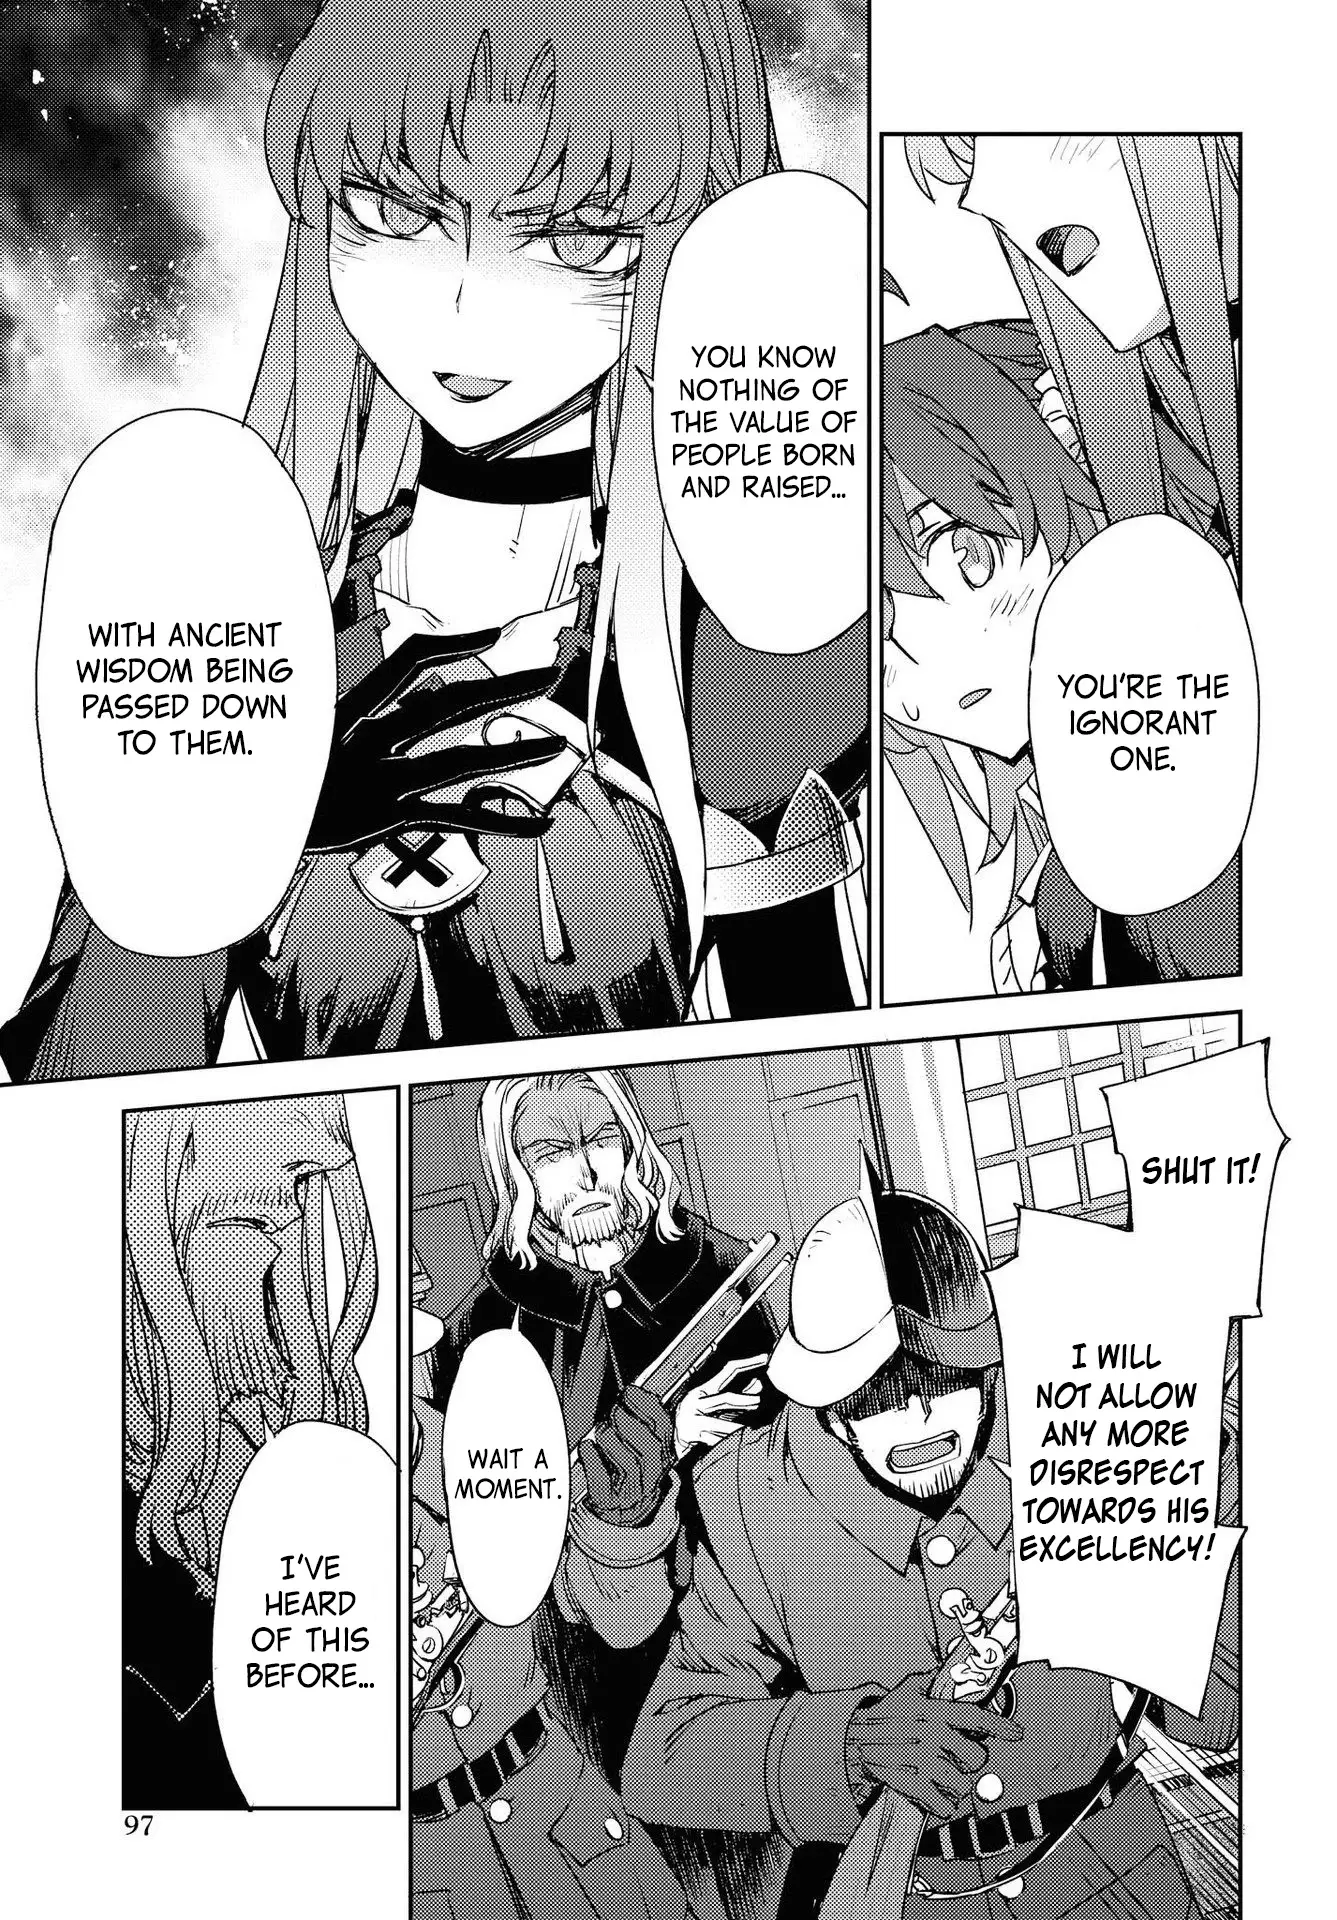 Fate/grand Order: Epic Of Remnant - Subspecies Singularity Iv: Taboo Advent Salem: Salem Of Heresy - 12 page 17